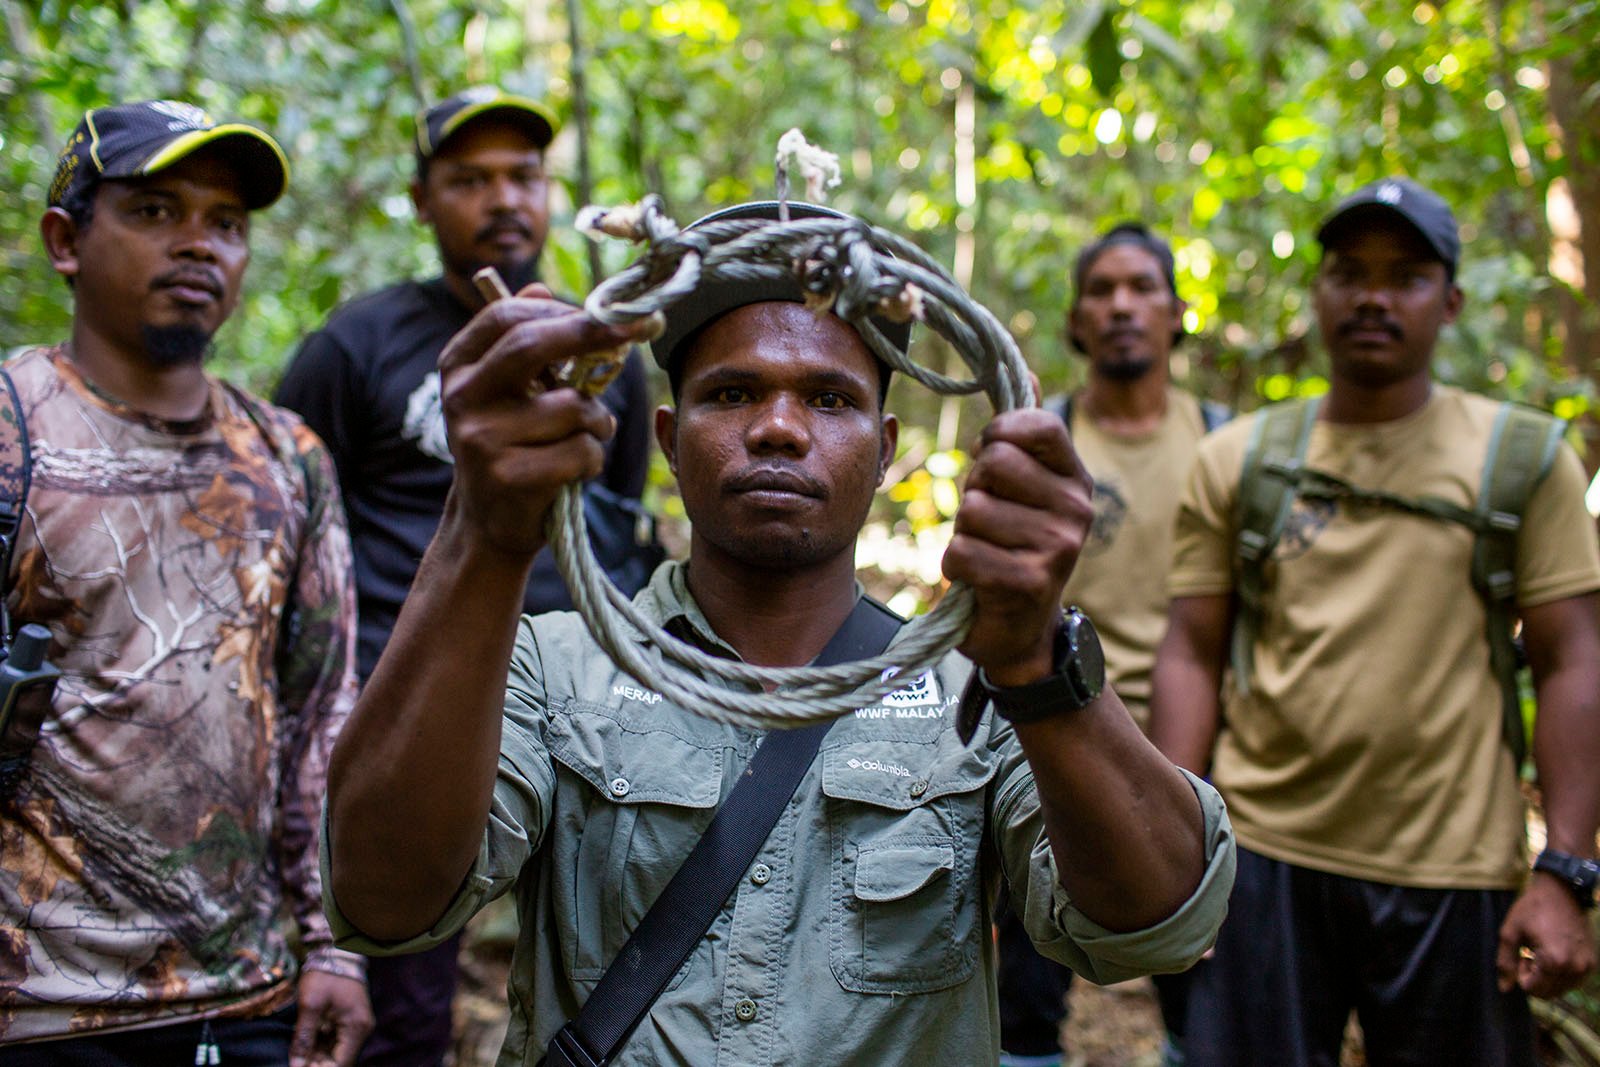 Anti-poaching patrol members hold up a collected snare.